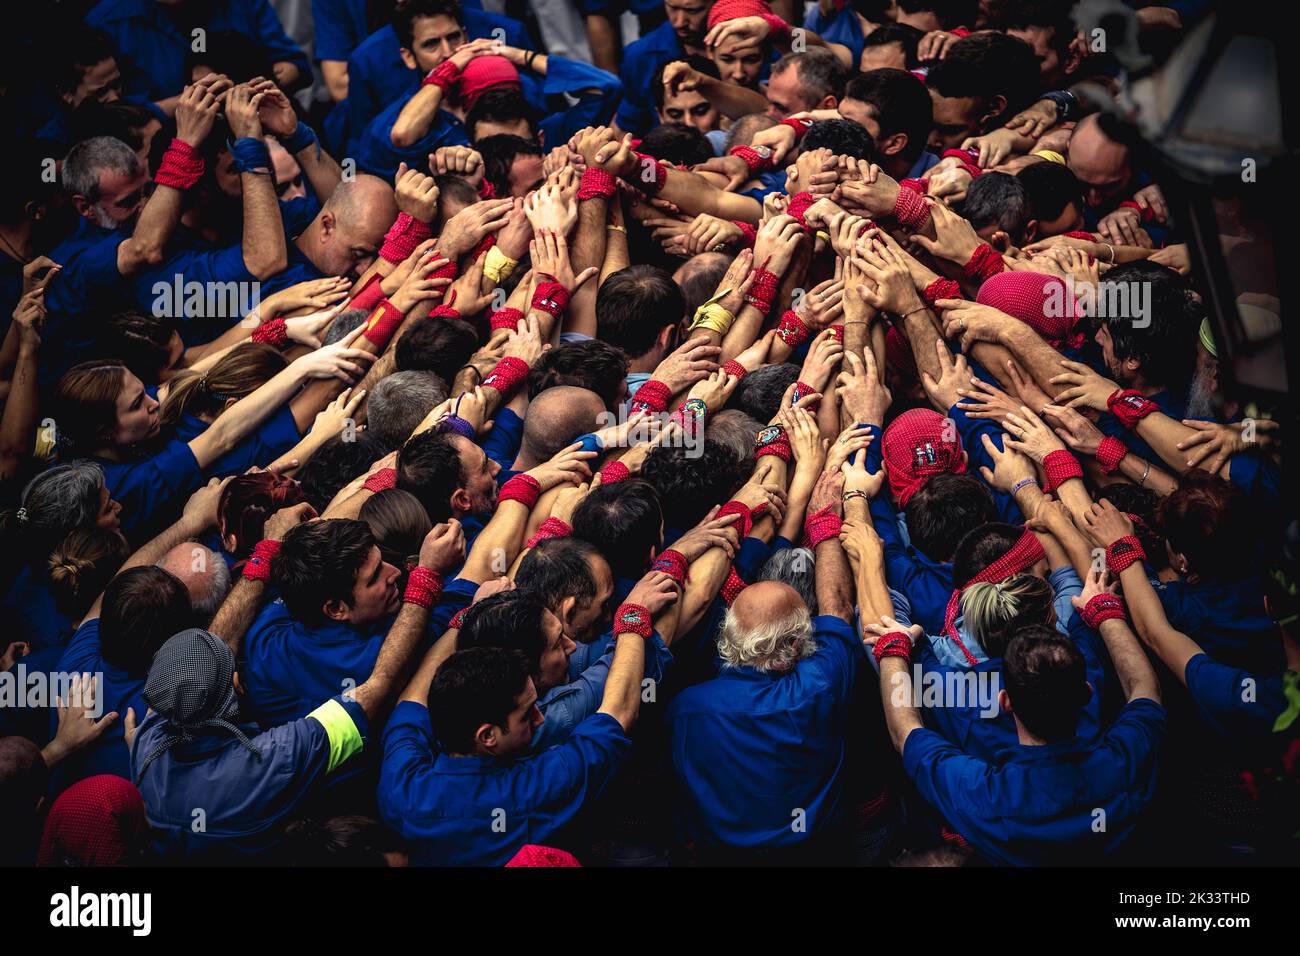 Barcelona, Spain. 24th Sep, 2022. The 'Castellers de Gracia' gather to form the base of a human tower during the 'Diada Castellera' at Barcelona's city festival 'La Merce' Credit: Matthias Oesterle/Alamy Live News Stock Photo